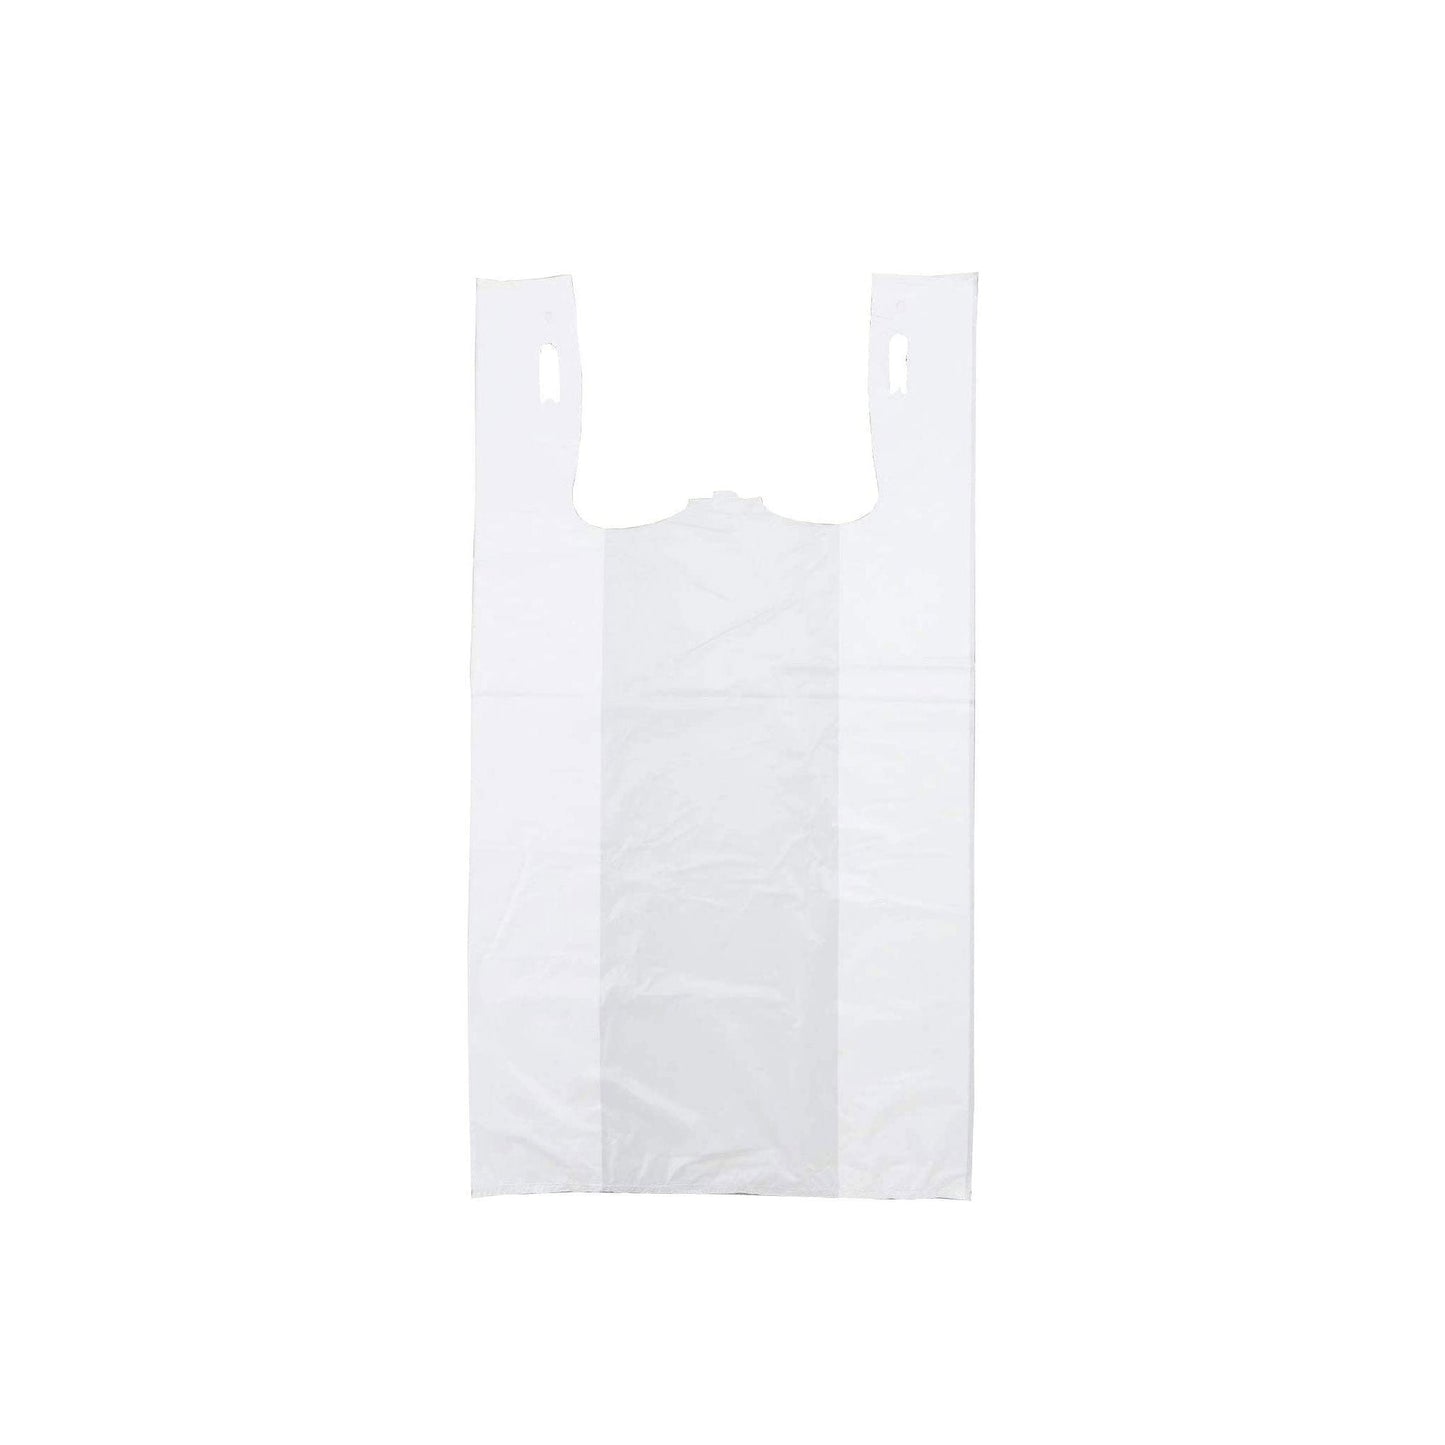 Large White Vest Carriers 11x17x21inch (800 Units)